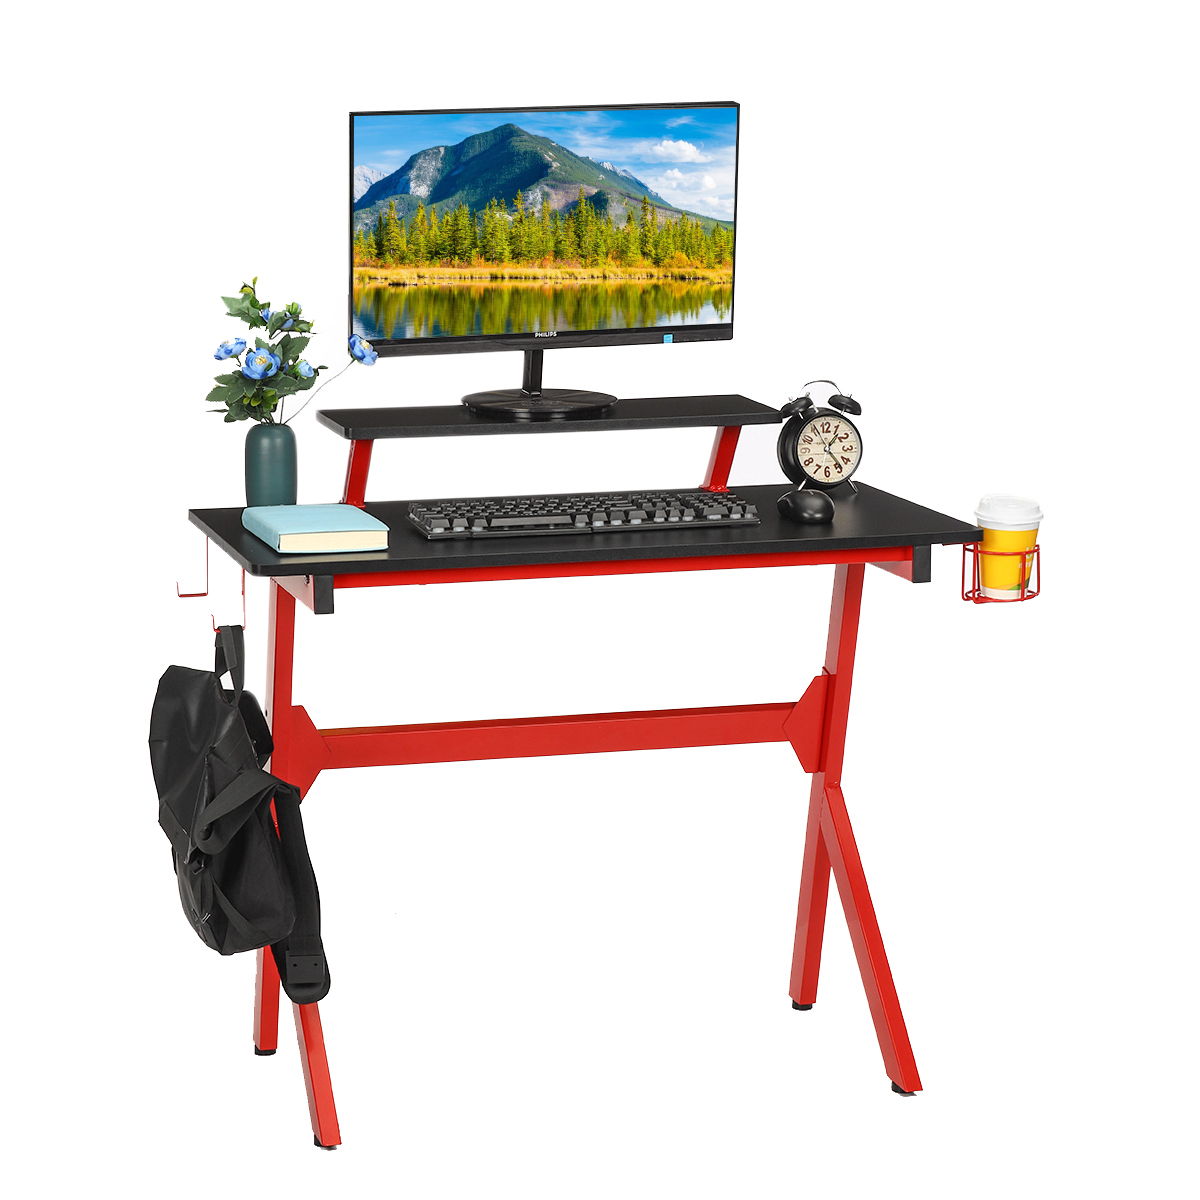 Find Hoffree Ergonomic Gaming Desk E sports Computer Office Table PC Laptop Desk Gamer Tables with Cup Holder for iMac for Sale on Gipsybee.com with cryptocurrencies